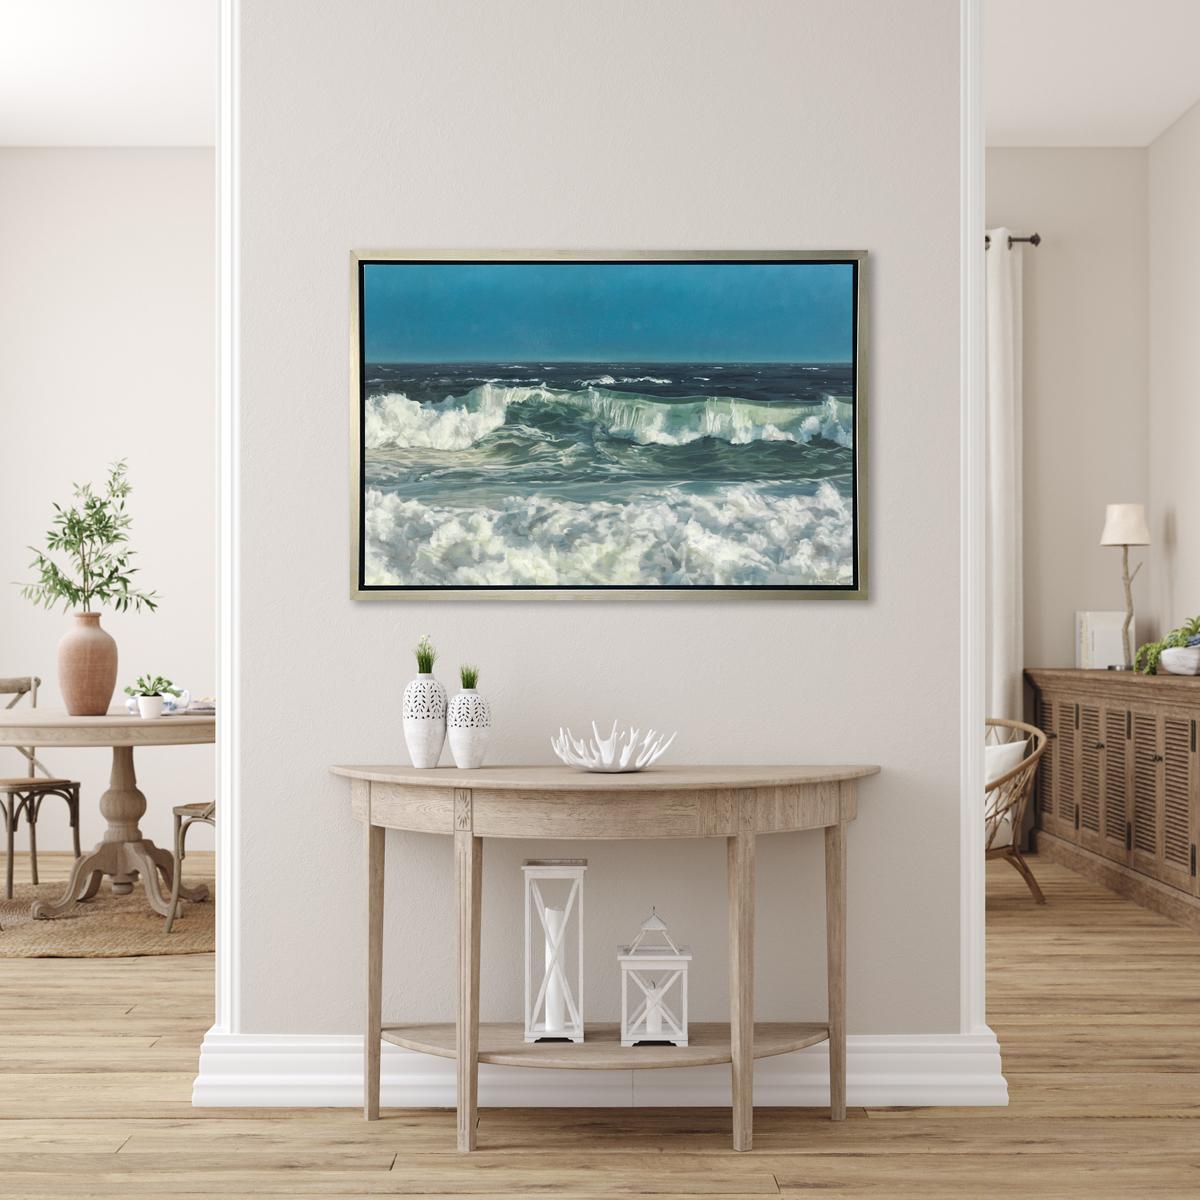 This limited edition seascape print by John Harris captures a highly detailed view of rolling ocean waves crashing near a shoreline under a clear blue sky. It features a mix of cool blue and sea green tones, highlighted by the white mist and foam of